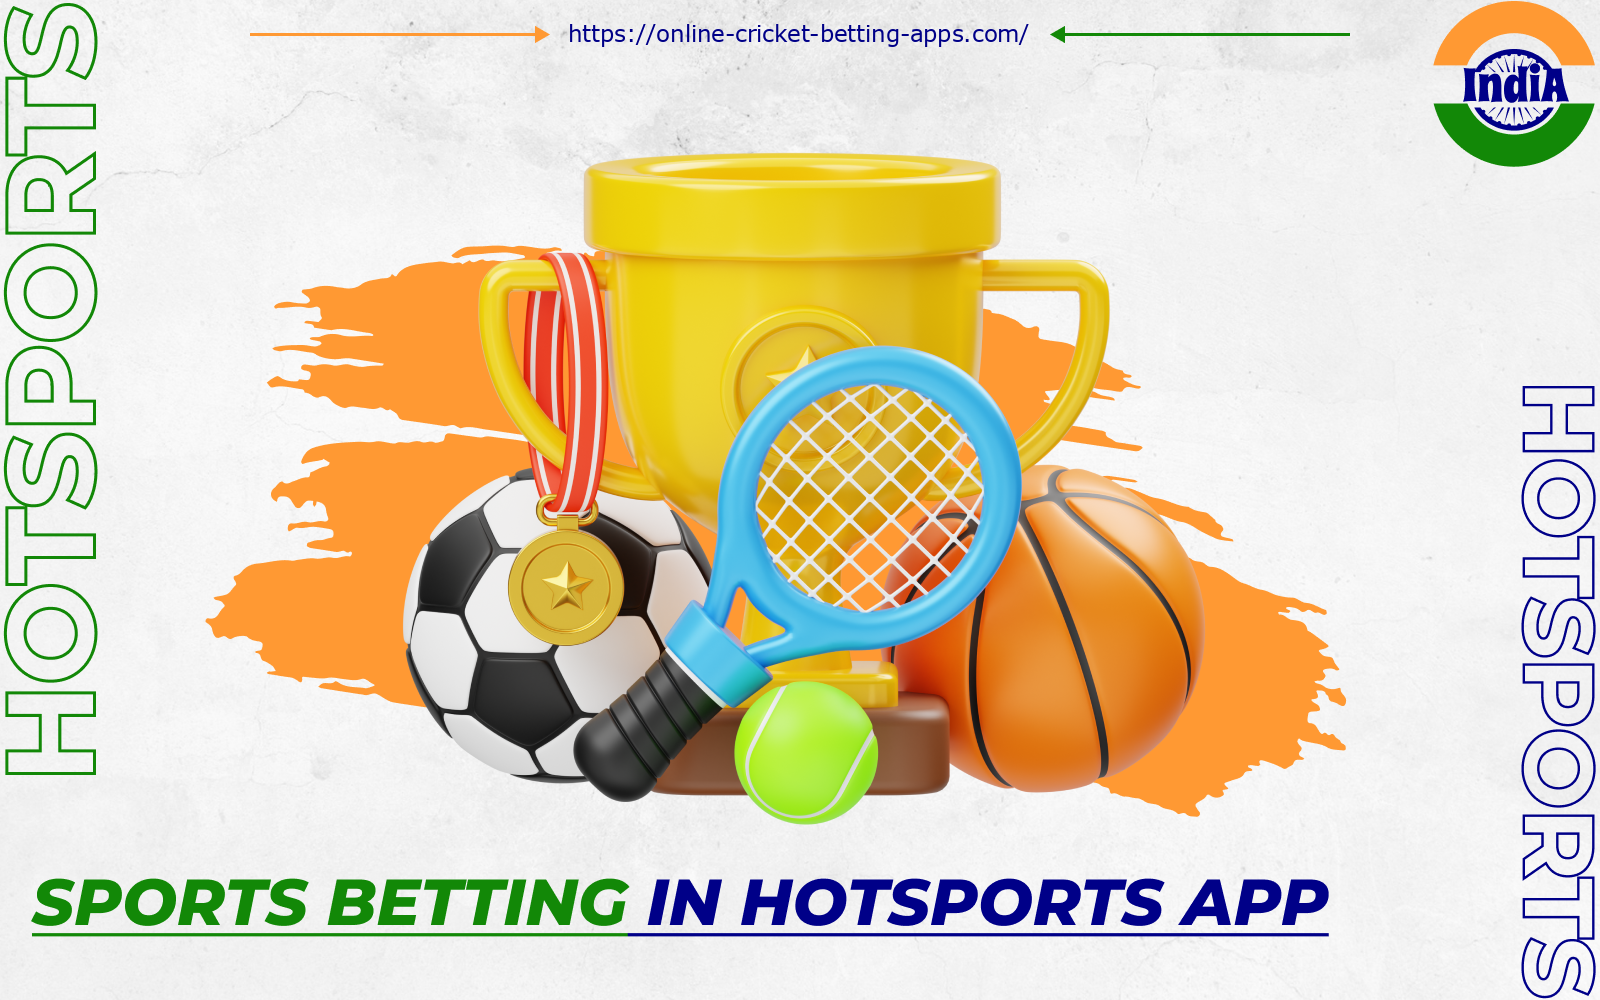 Hotsports contains a good set of tools that Indian users may need in sports betting